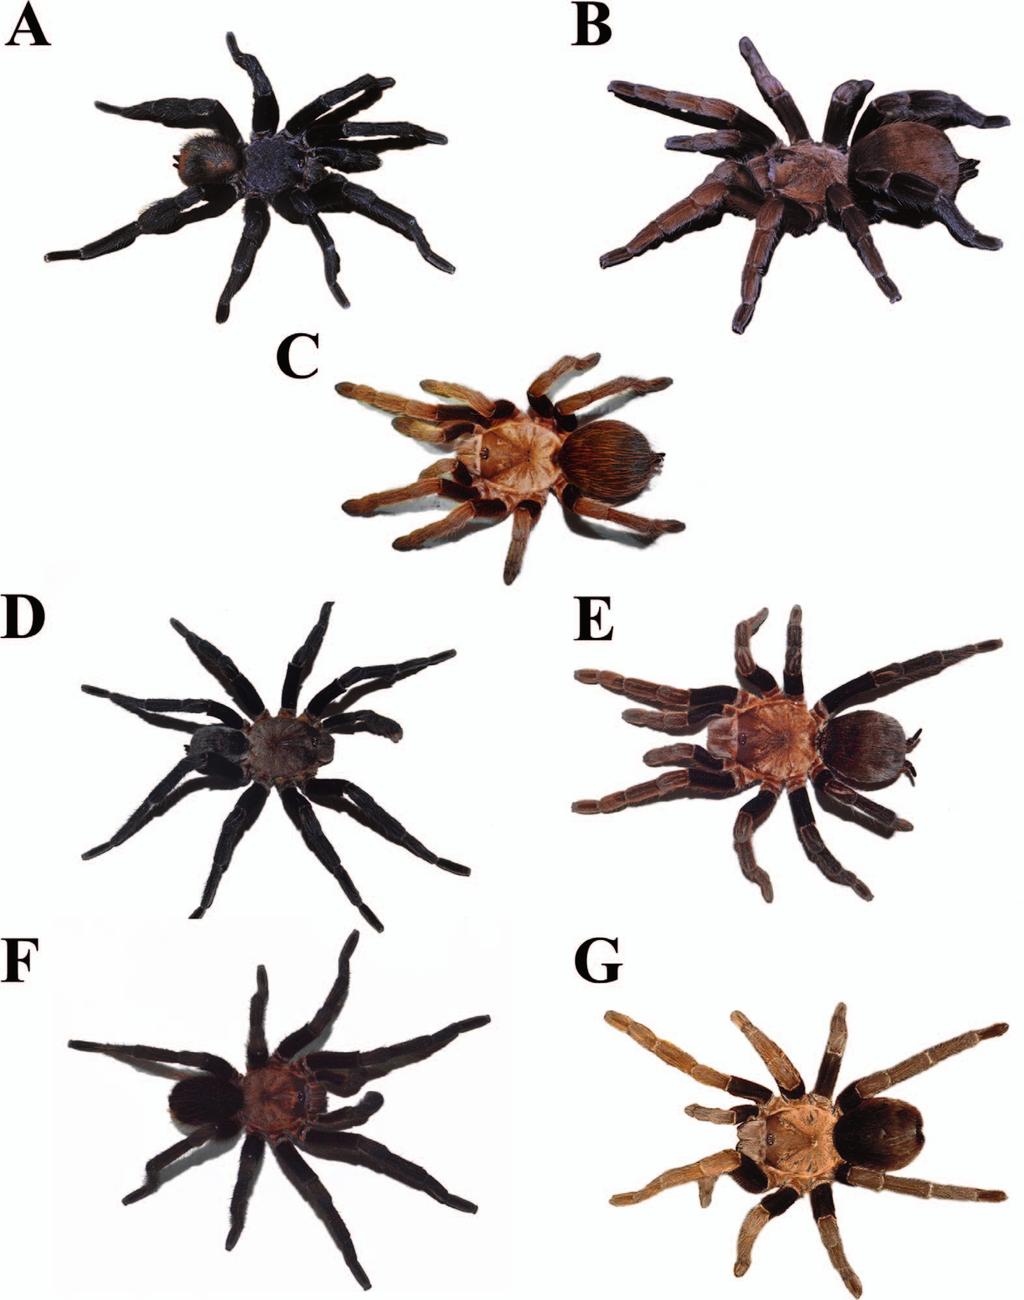 72 JOURNAL OF ARACHNOLOGY Figure 4. Crassicrus species, habitus images. A B. Crassicrus lamanai: A. Male. B. Female from 0.5 km W.